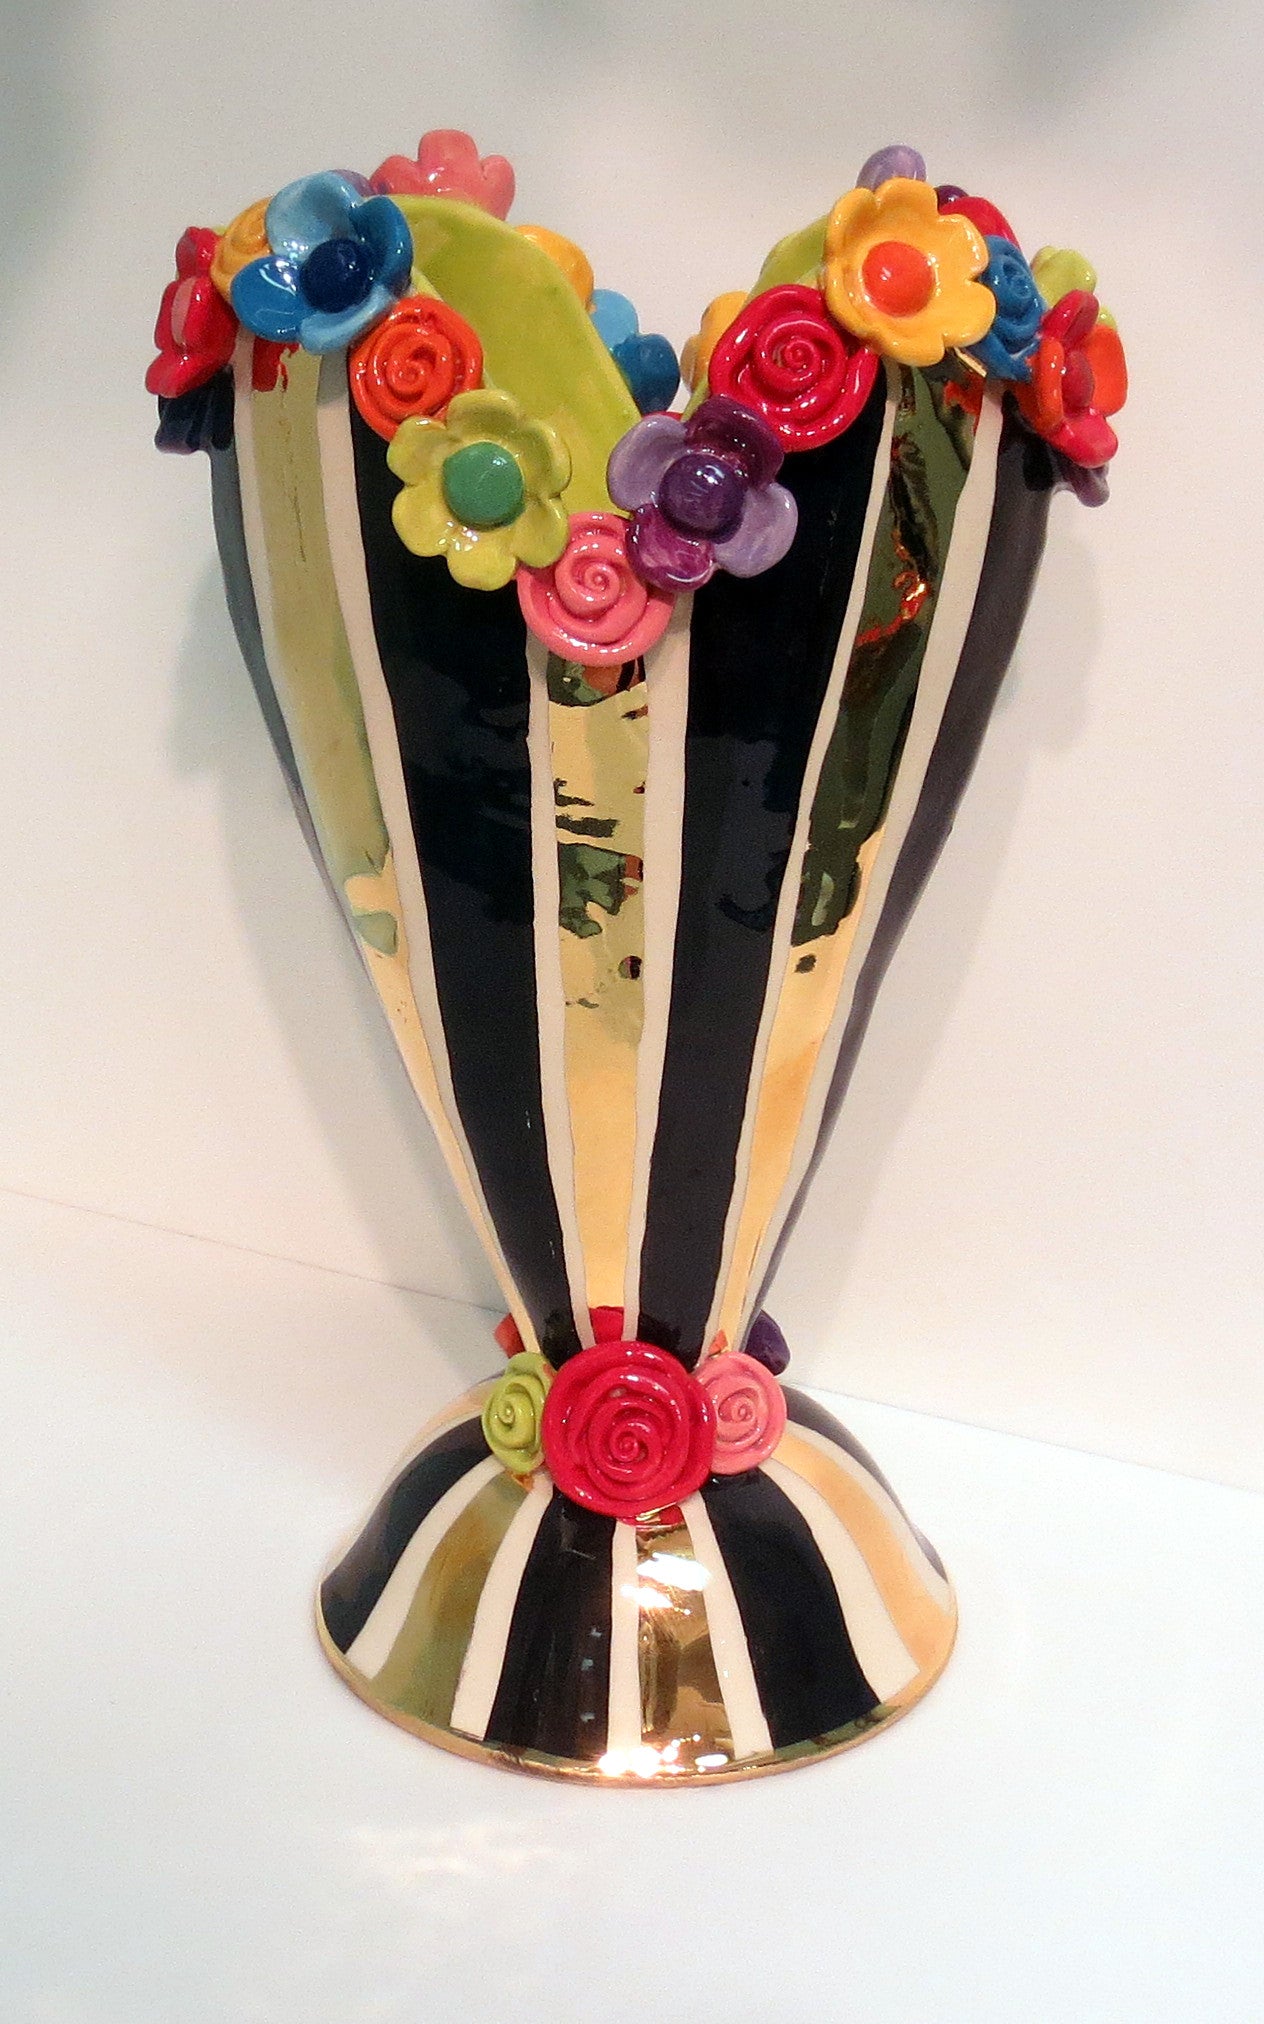 Large Encrusted Heart Vase "Black and White and Gold" - MaryRoseYoung